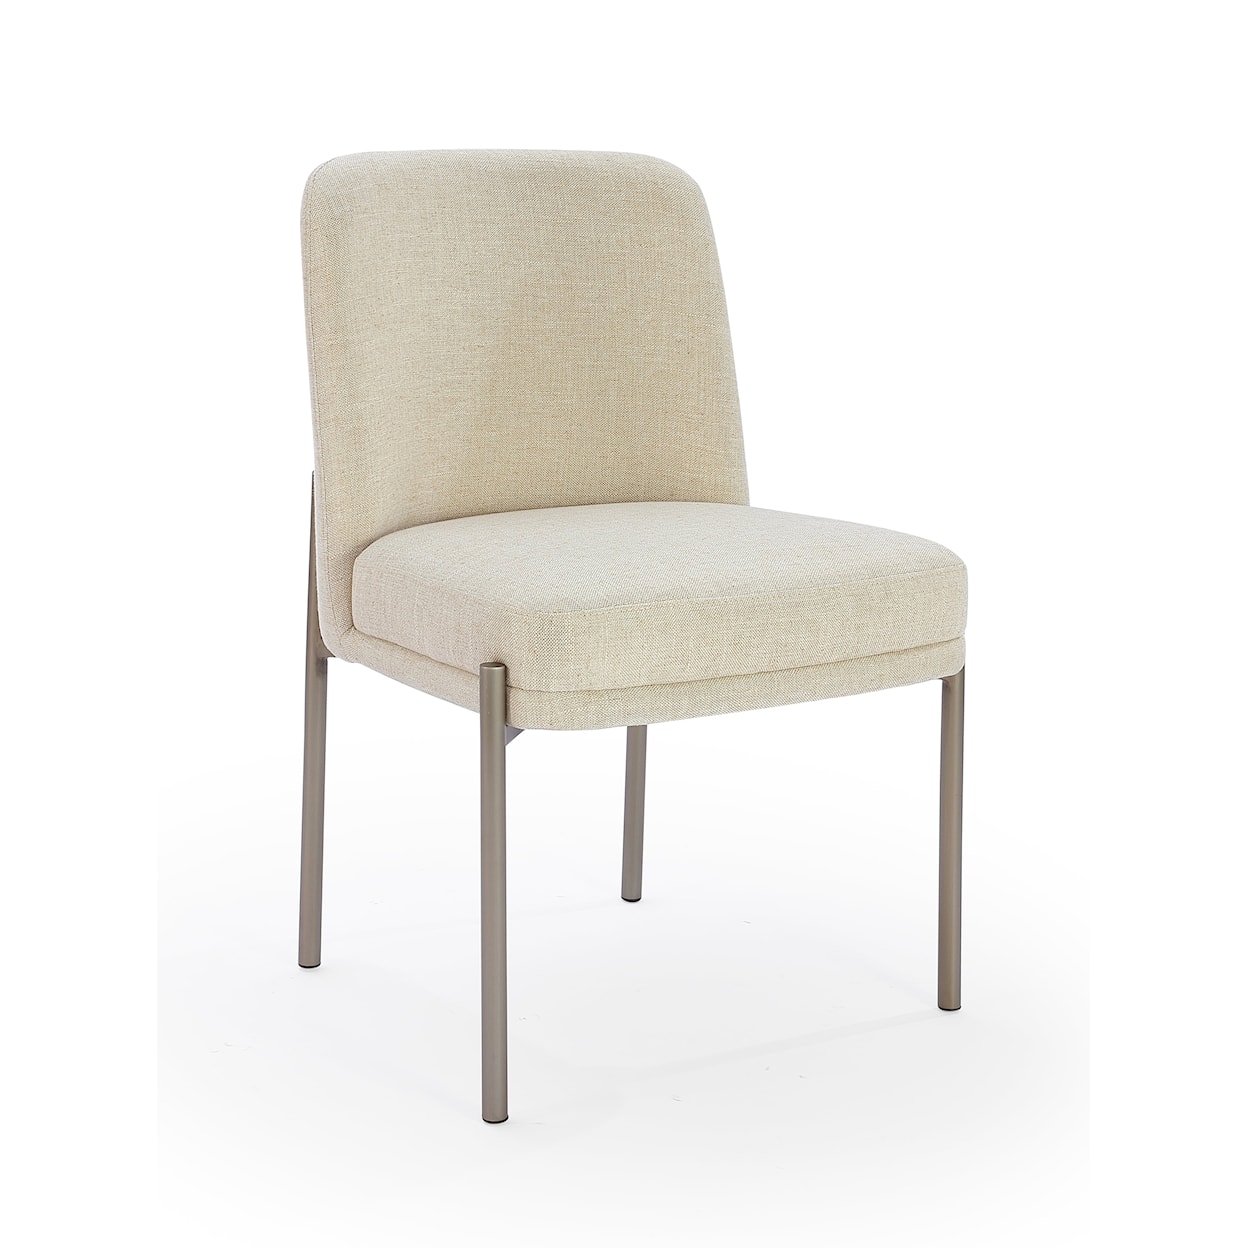 Modus International Crossroads 2.0 Dion Upholstered Dining Chair